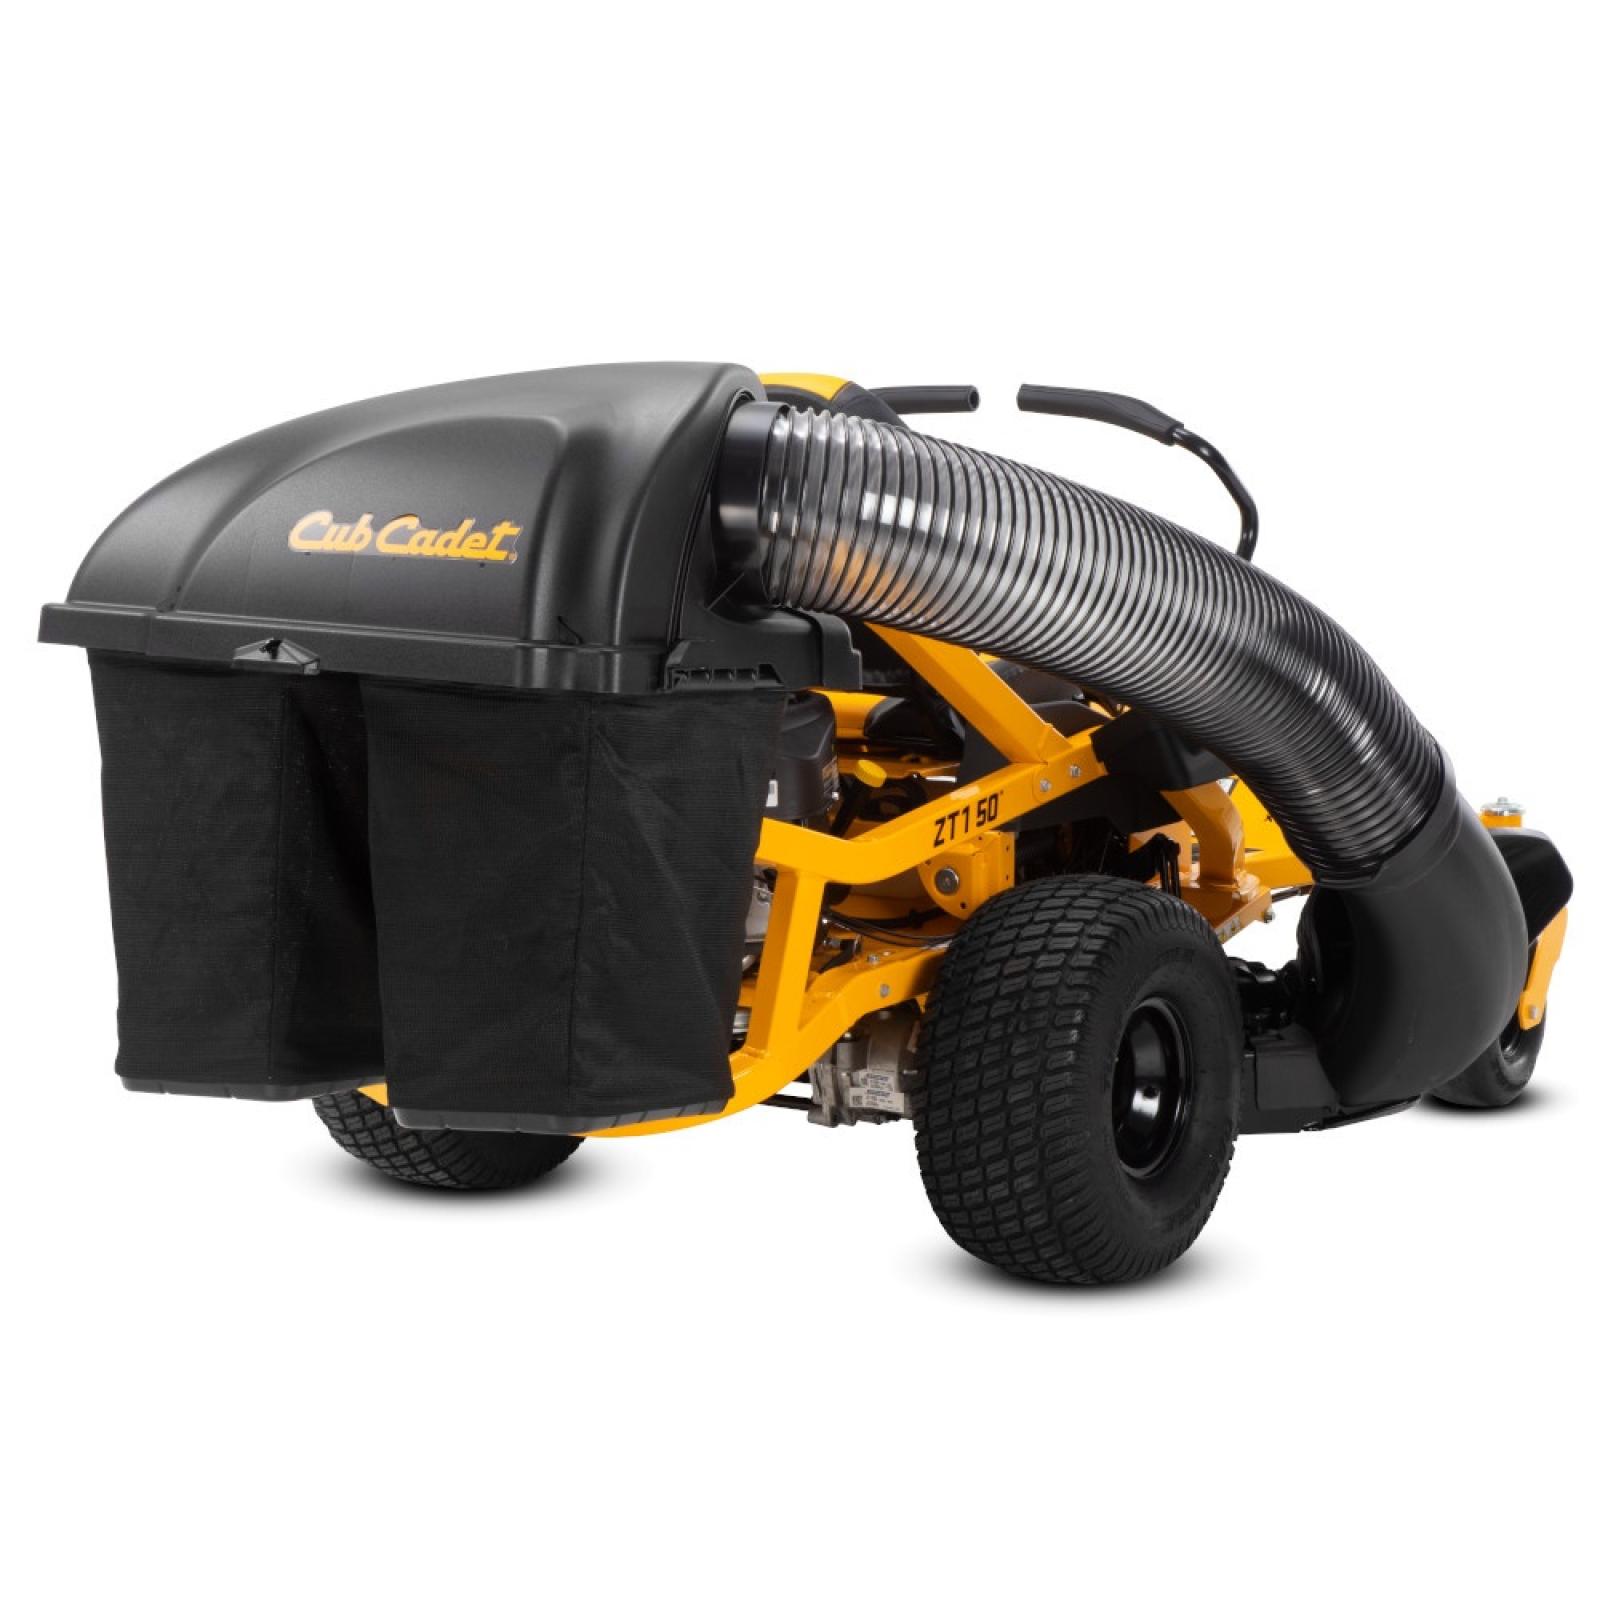 Cub Cadet Double Bagger for Zero-Turn Mowers 50" and 54" Decks